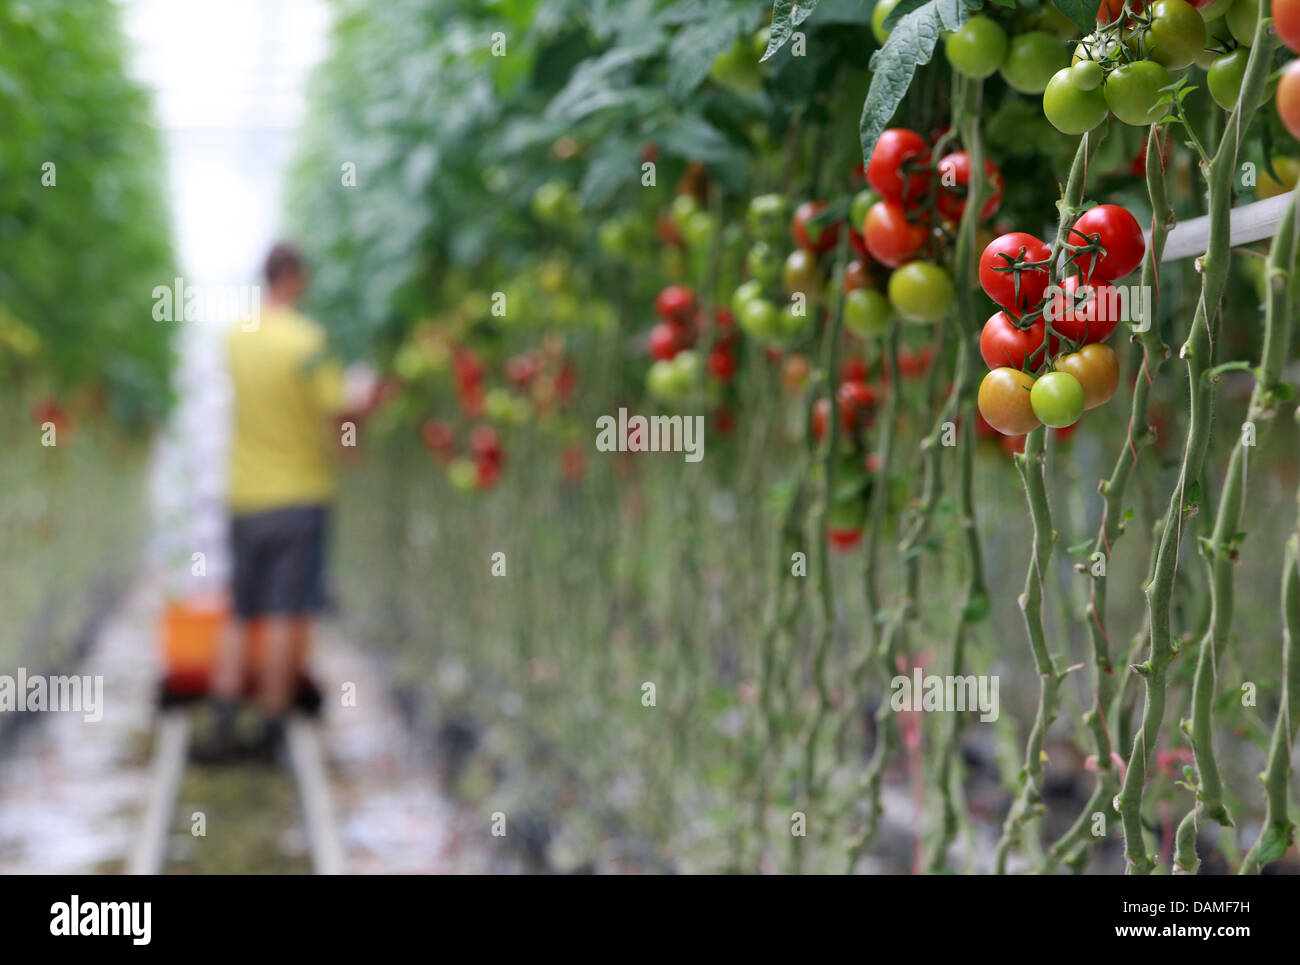 A harvest worker from Leo Berghs-Trieneken's vegetable farm picks tomatoes in a greenhouse in Straelen, Germany, 10 June 2011. The farmer has around 12 hectares of tomatoes, lettuce and cucumbers and because of the E. Coli crisis, he had daily sales losses up to 20,000 euros. Photo: Roland Weihrauch Stock Photo